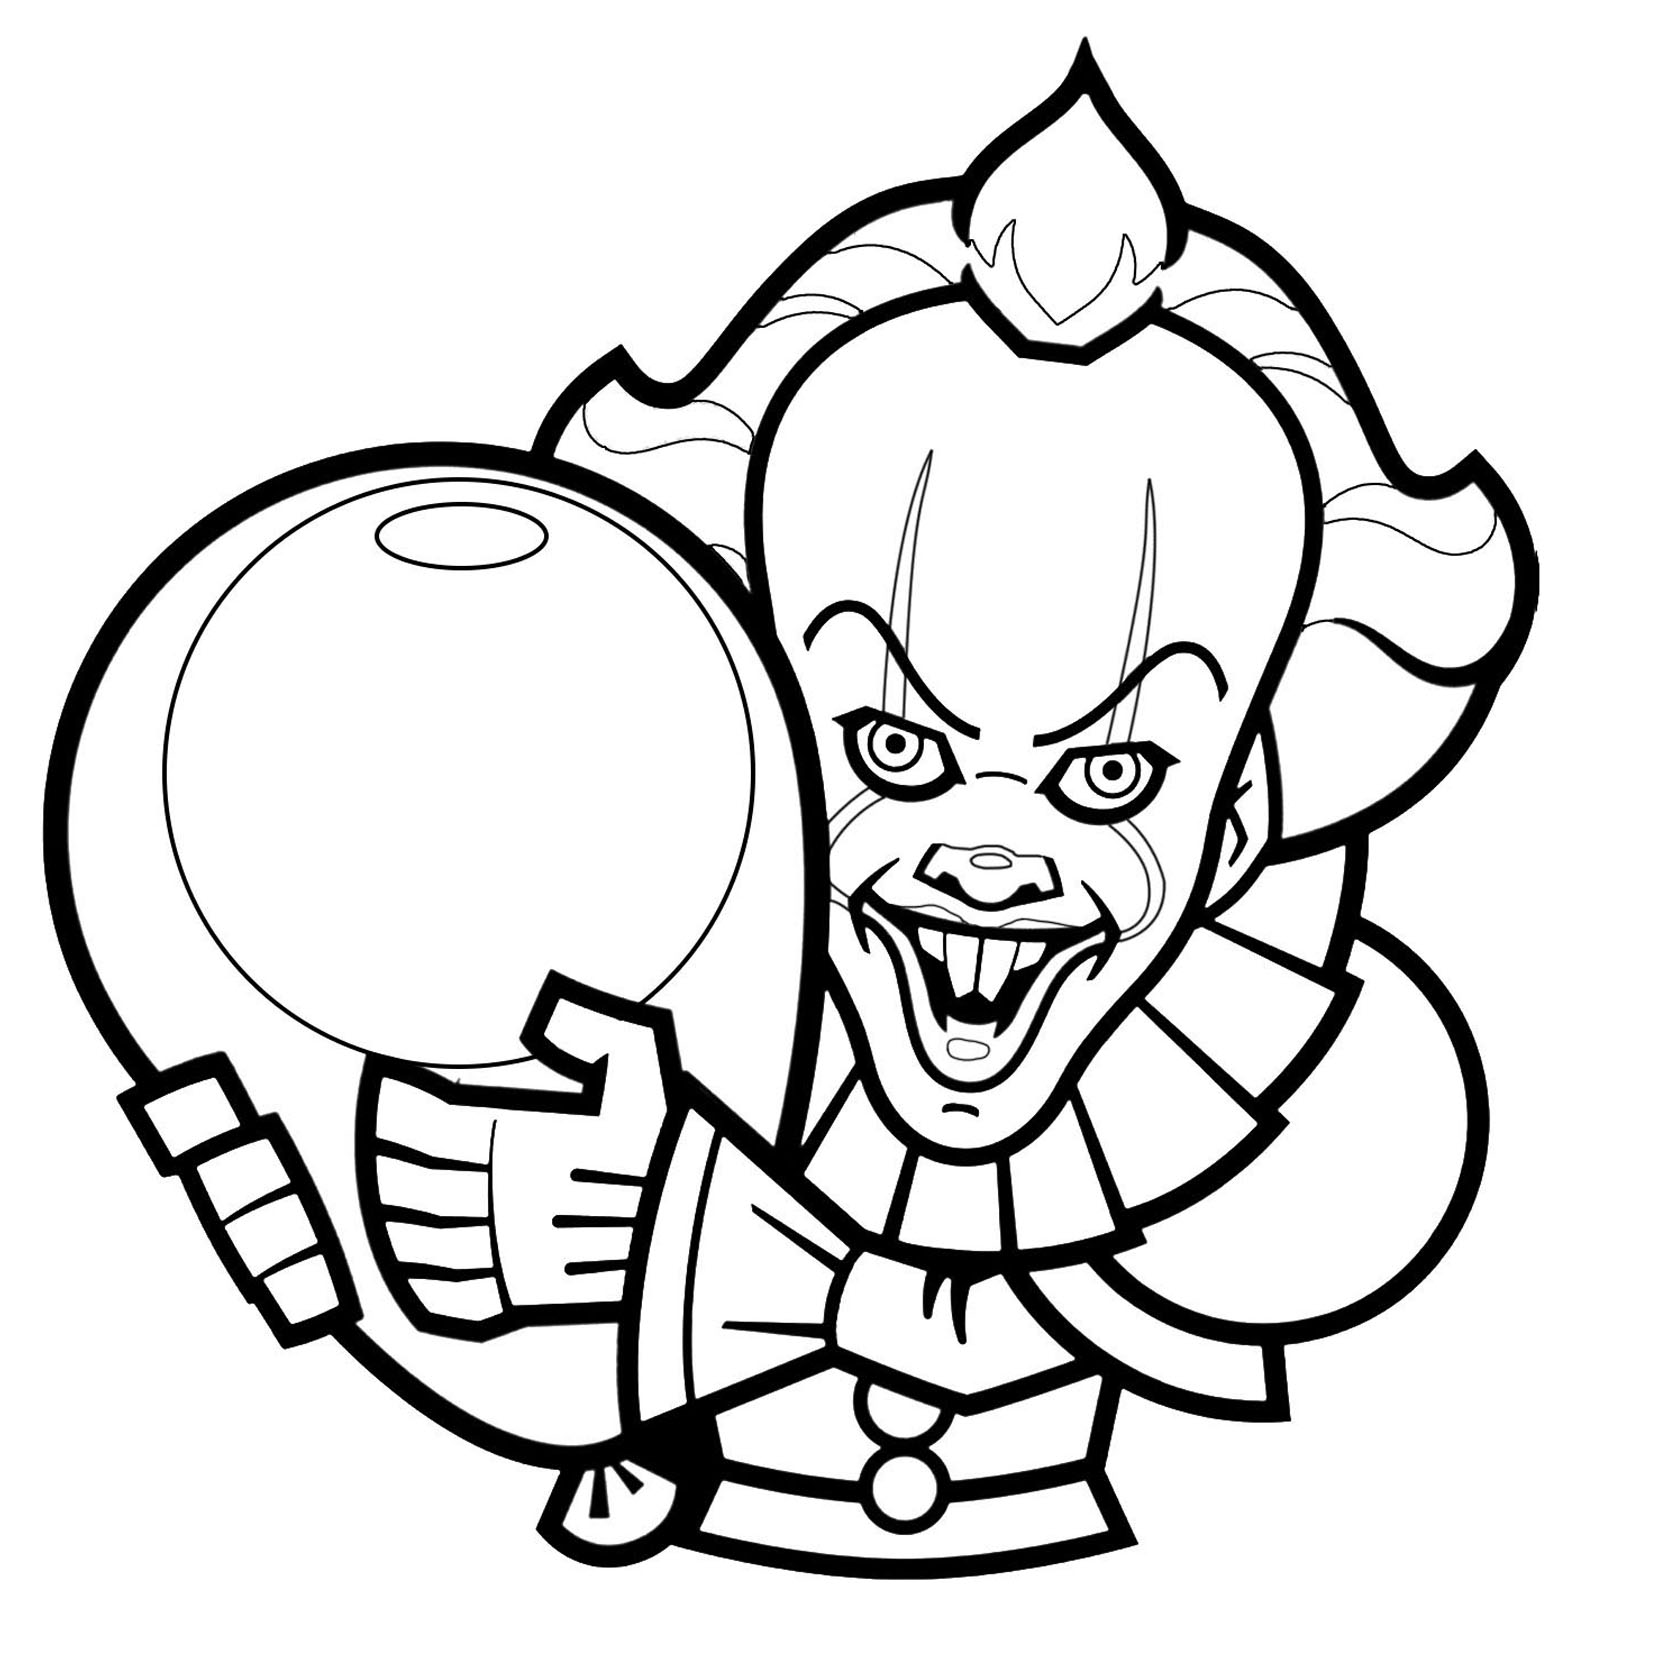 Clown Of It - Version - 1 - Halloween Kids Coloring Pages